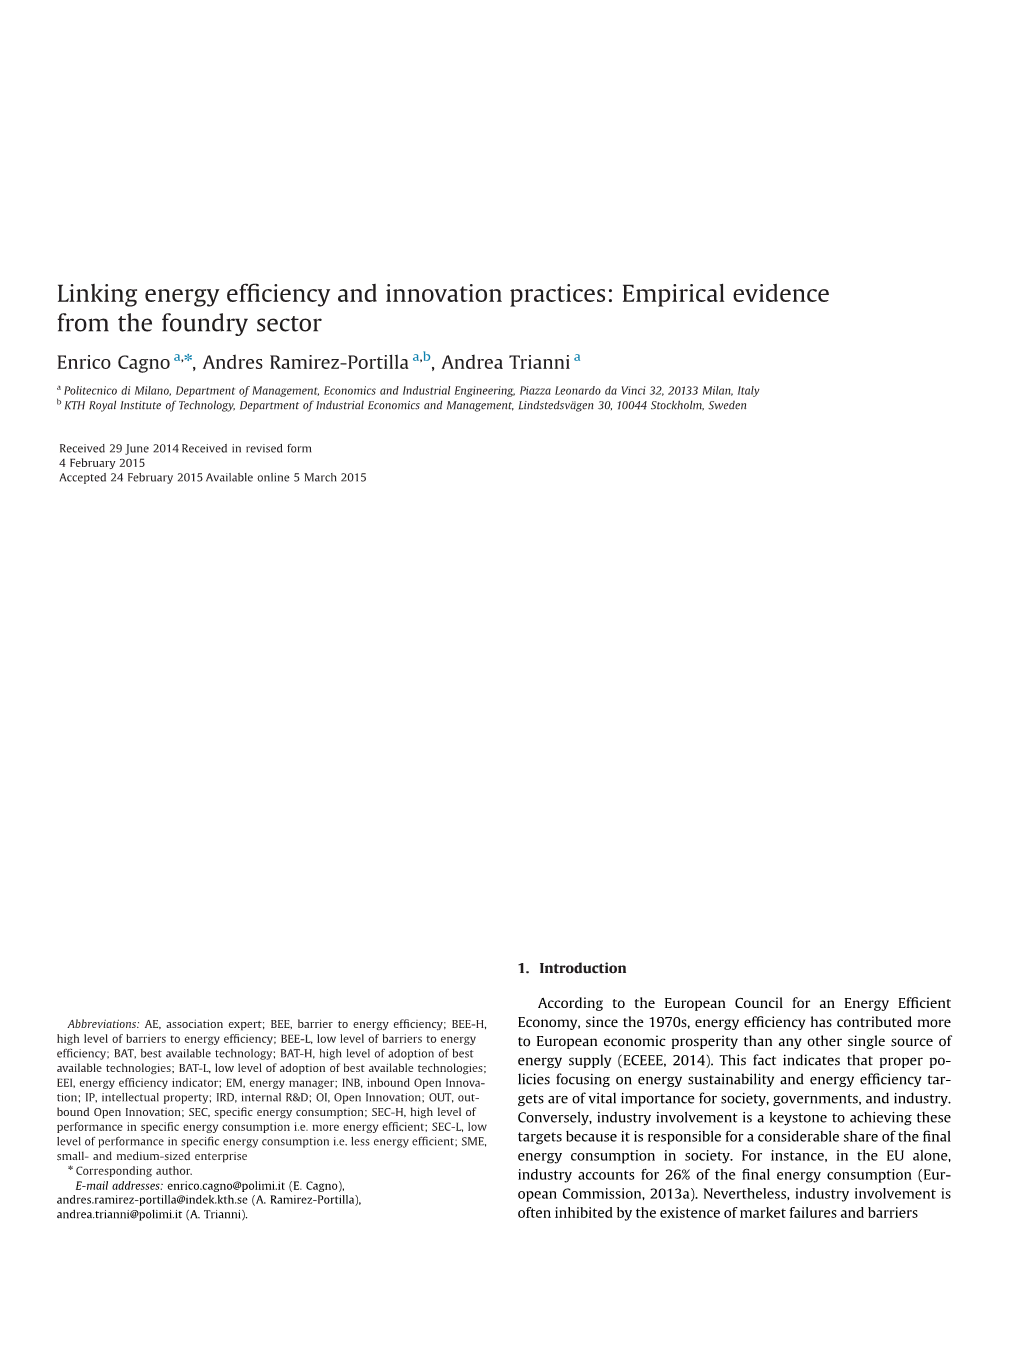 Linking Energy Efficiency and Innovation Practices Empirical